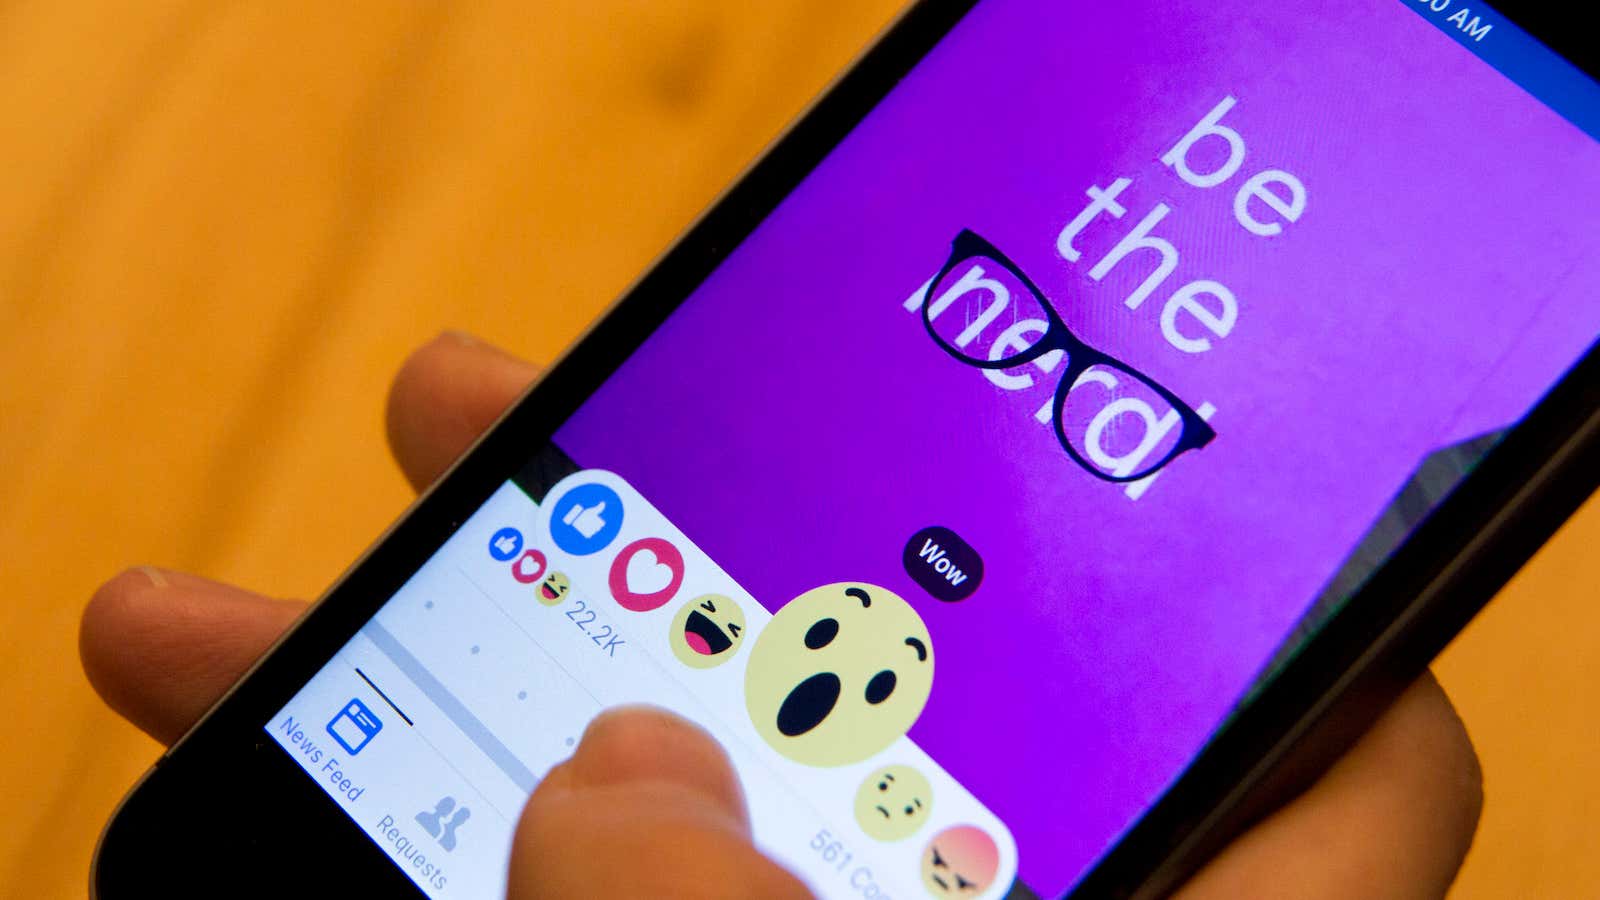 How will Facebook incorporate its new Reactions into its news feed algorithm?